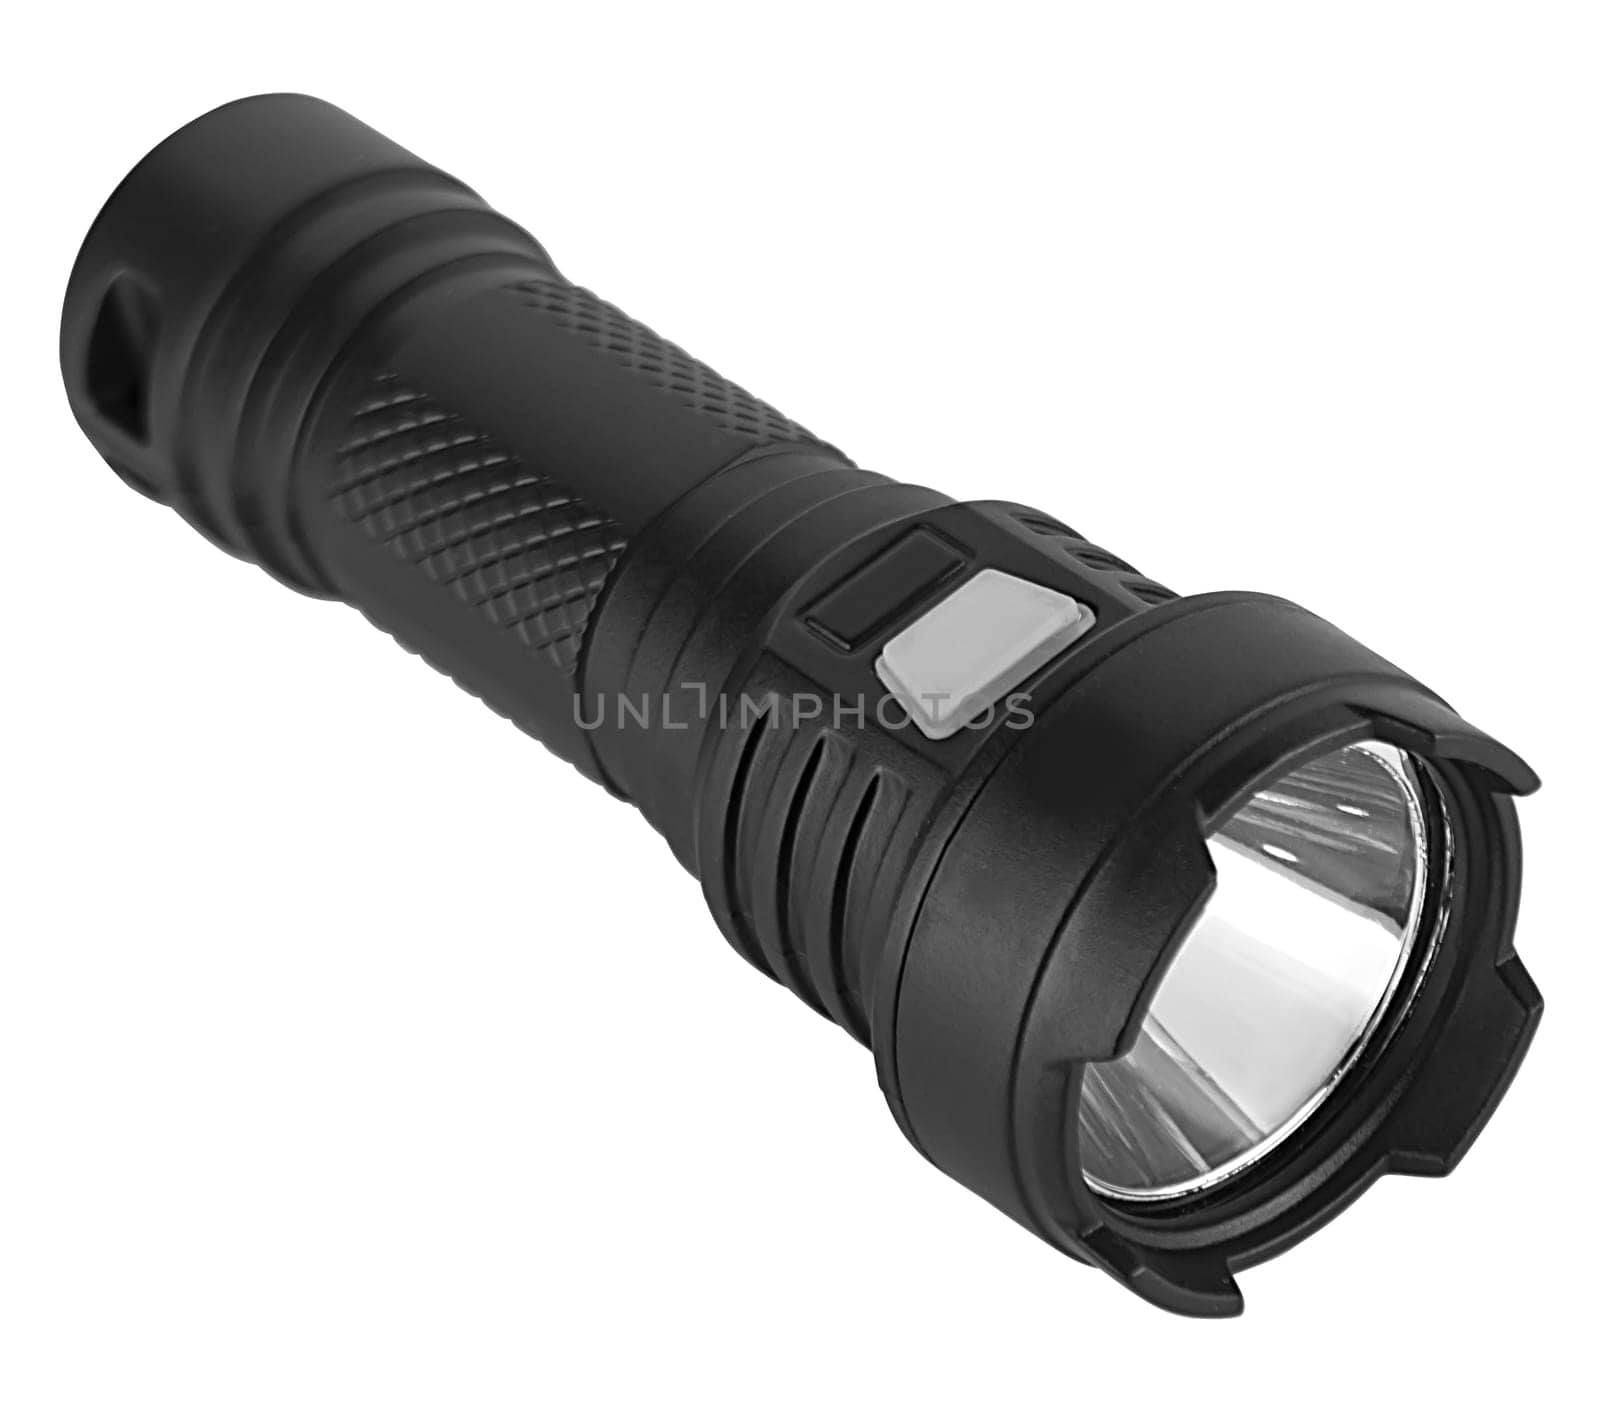 Hand-held LED flashlight, white background in insulation by A_A